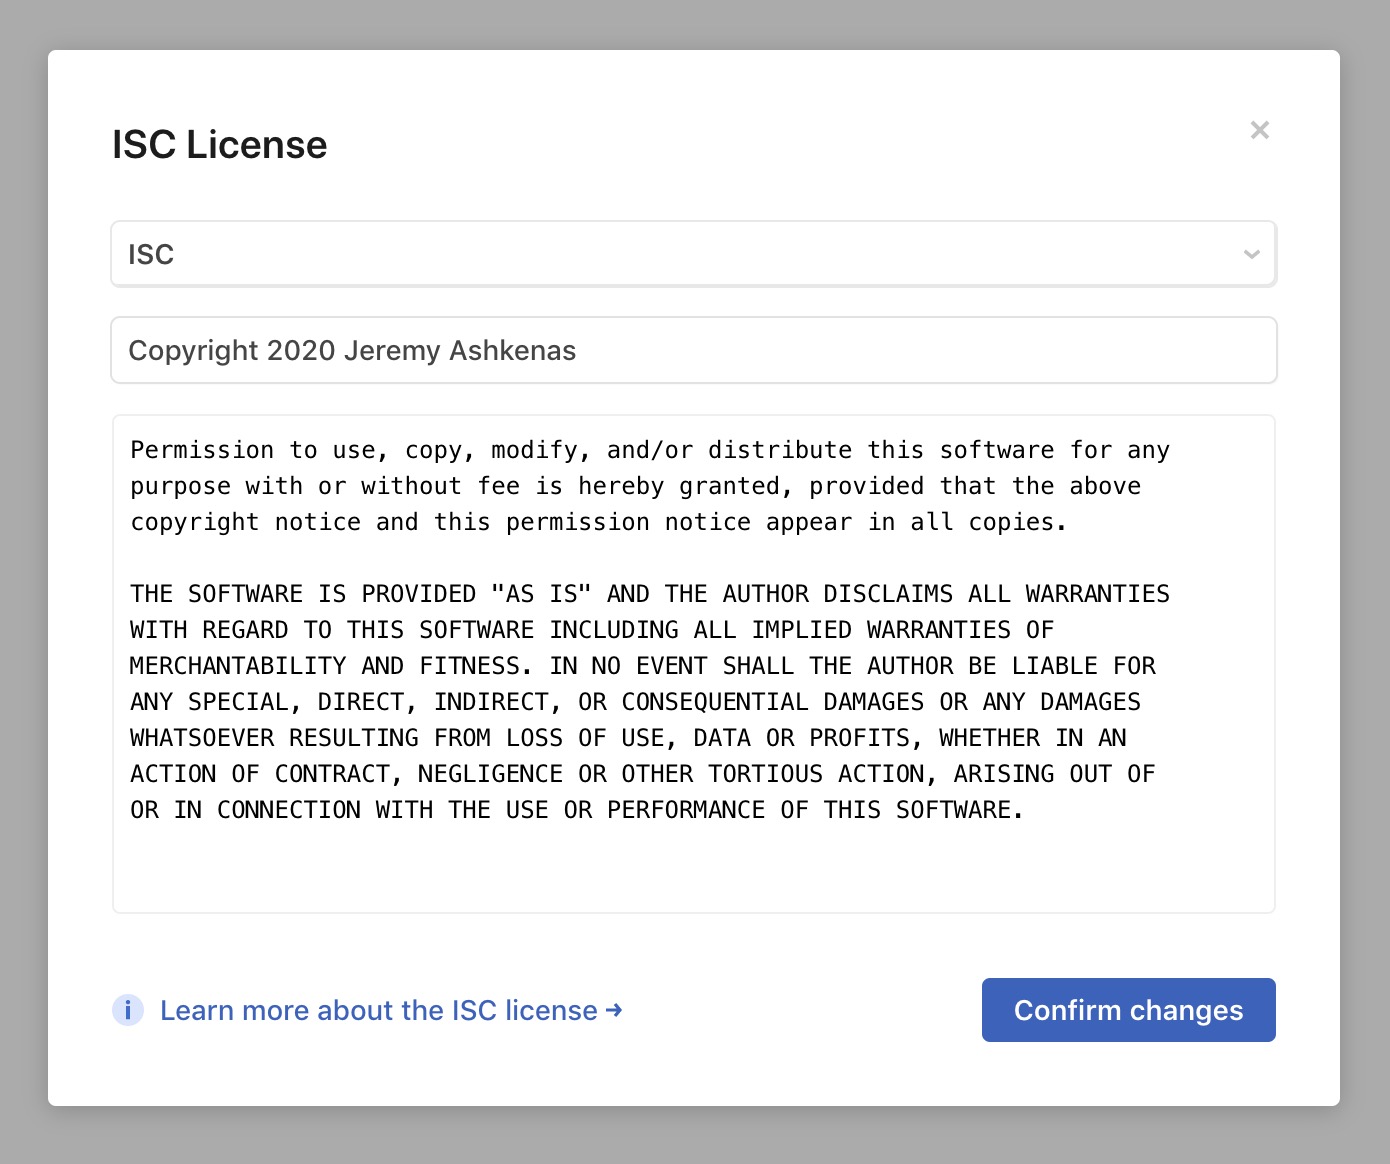 After clicking 'Set license' a new modal window opens, where a user can enter the license type and additional information as text.